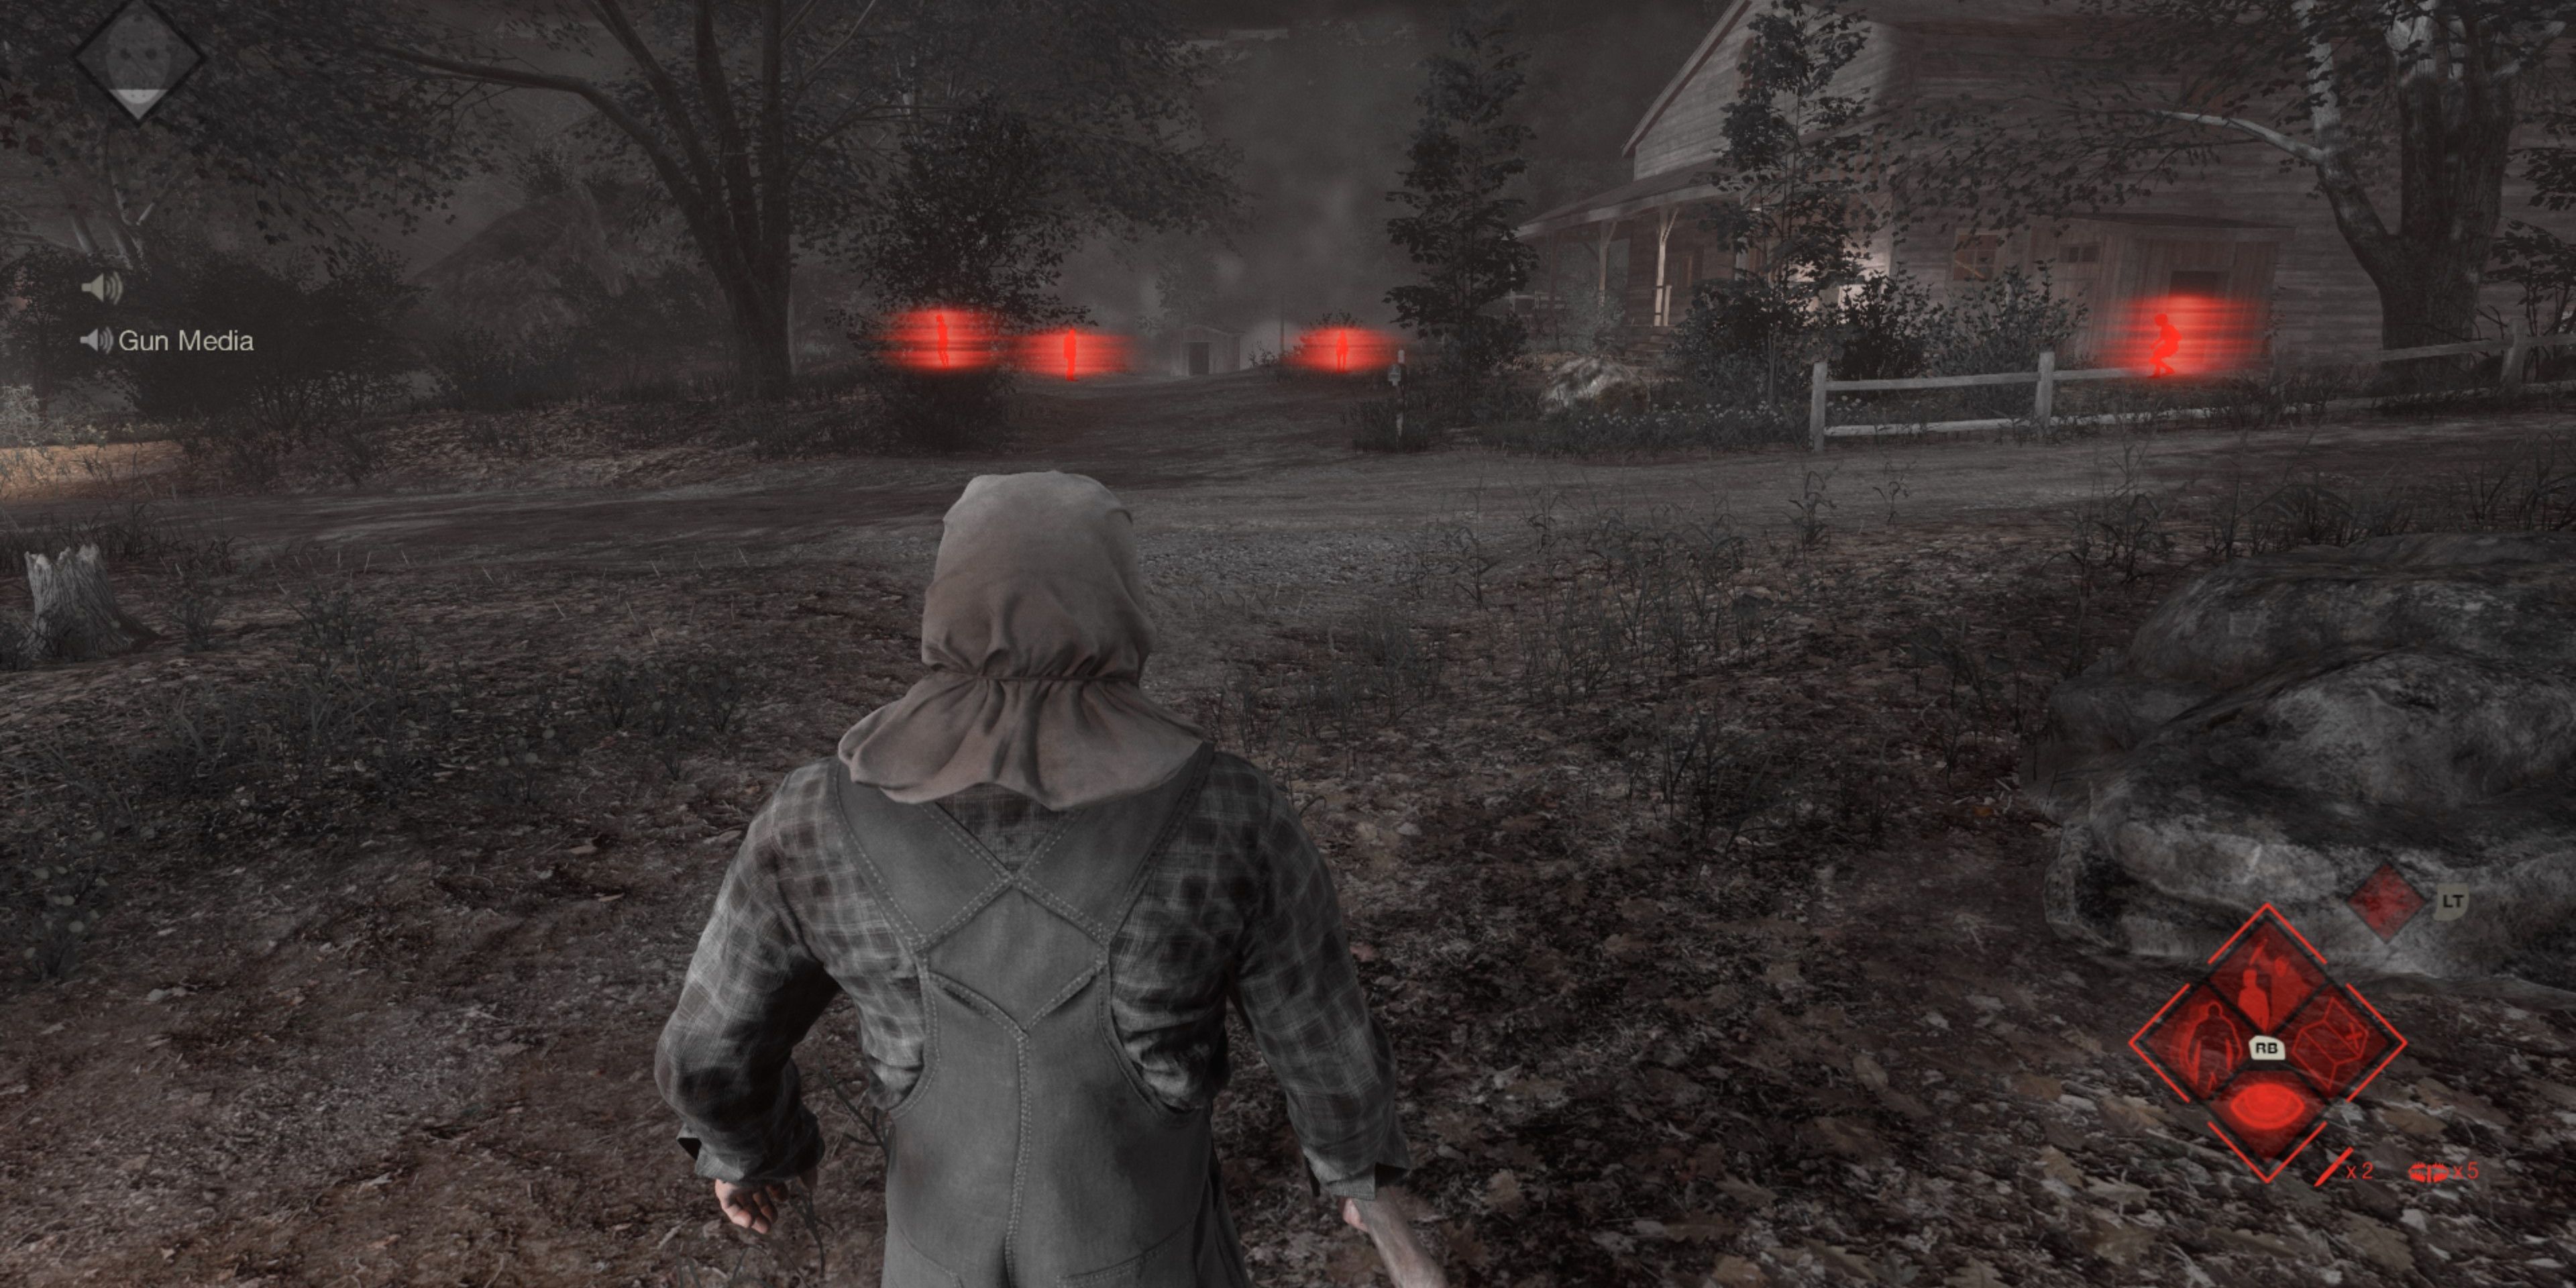 player as jason using abilities to find other players